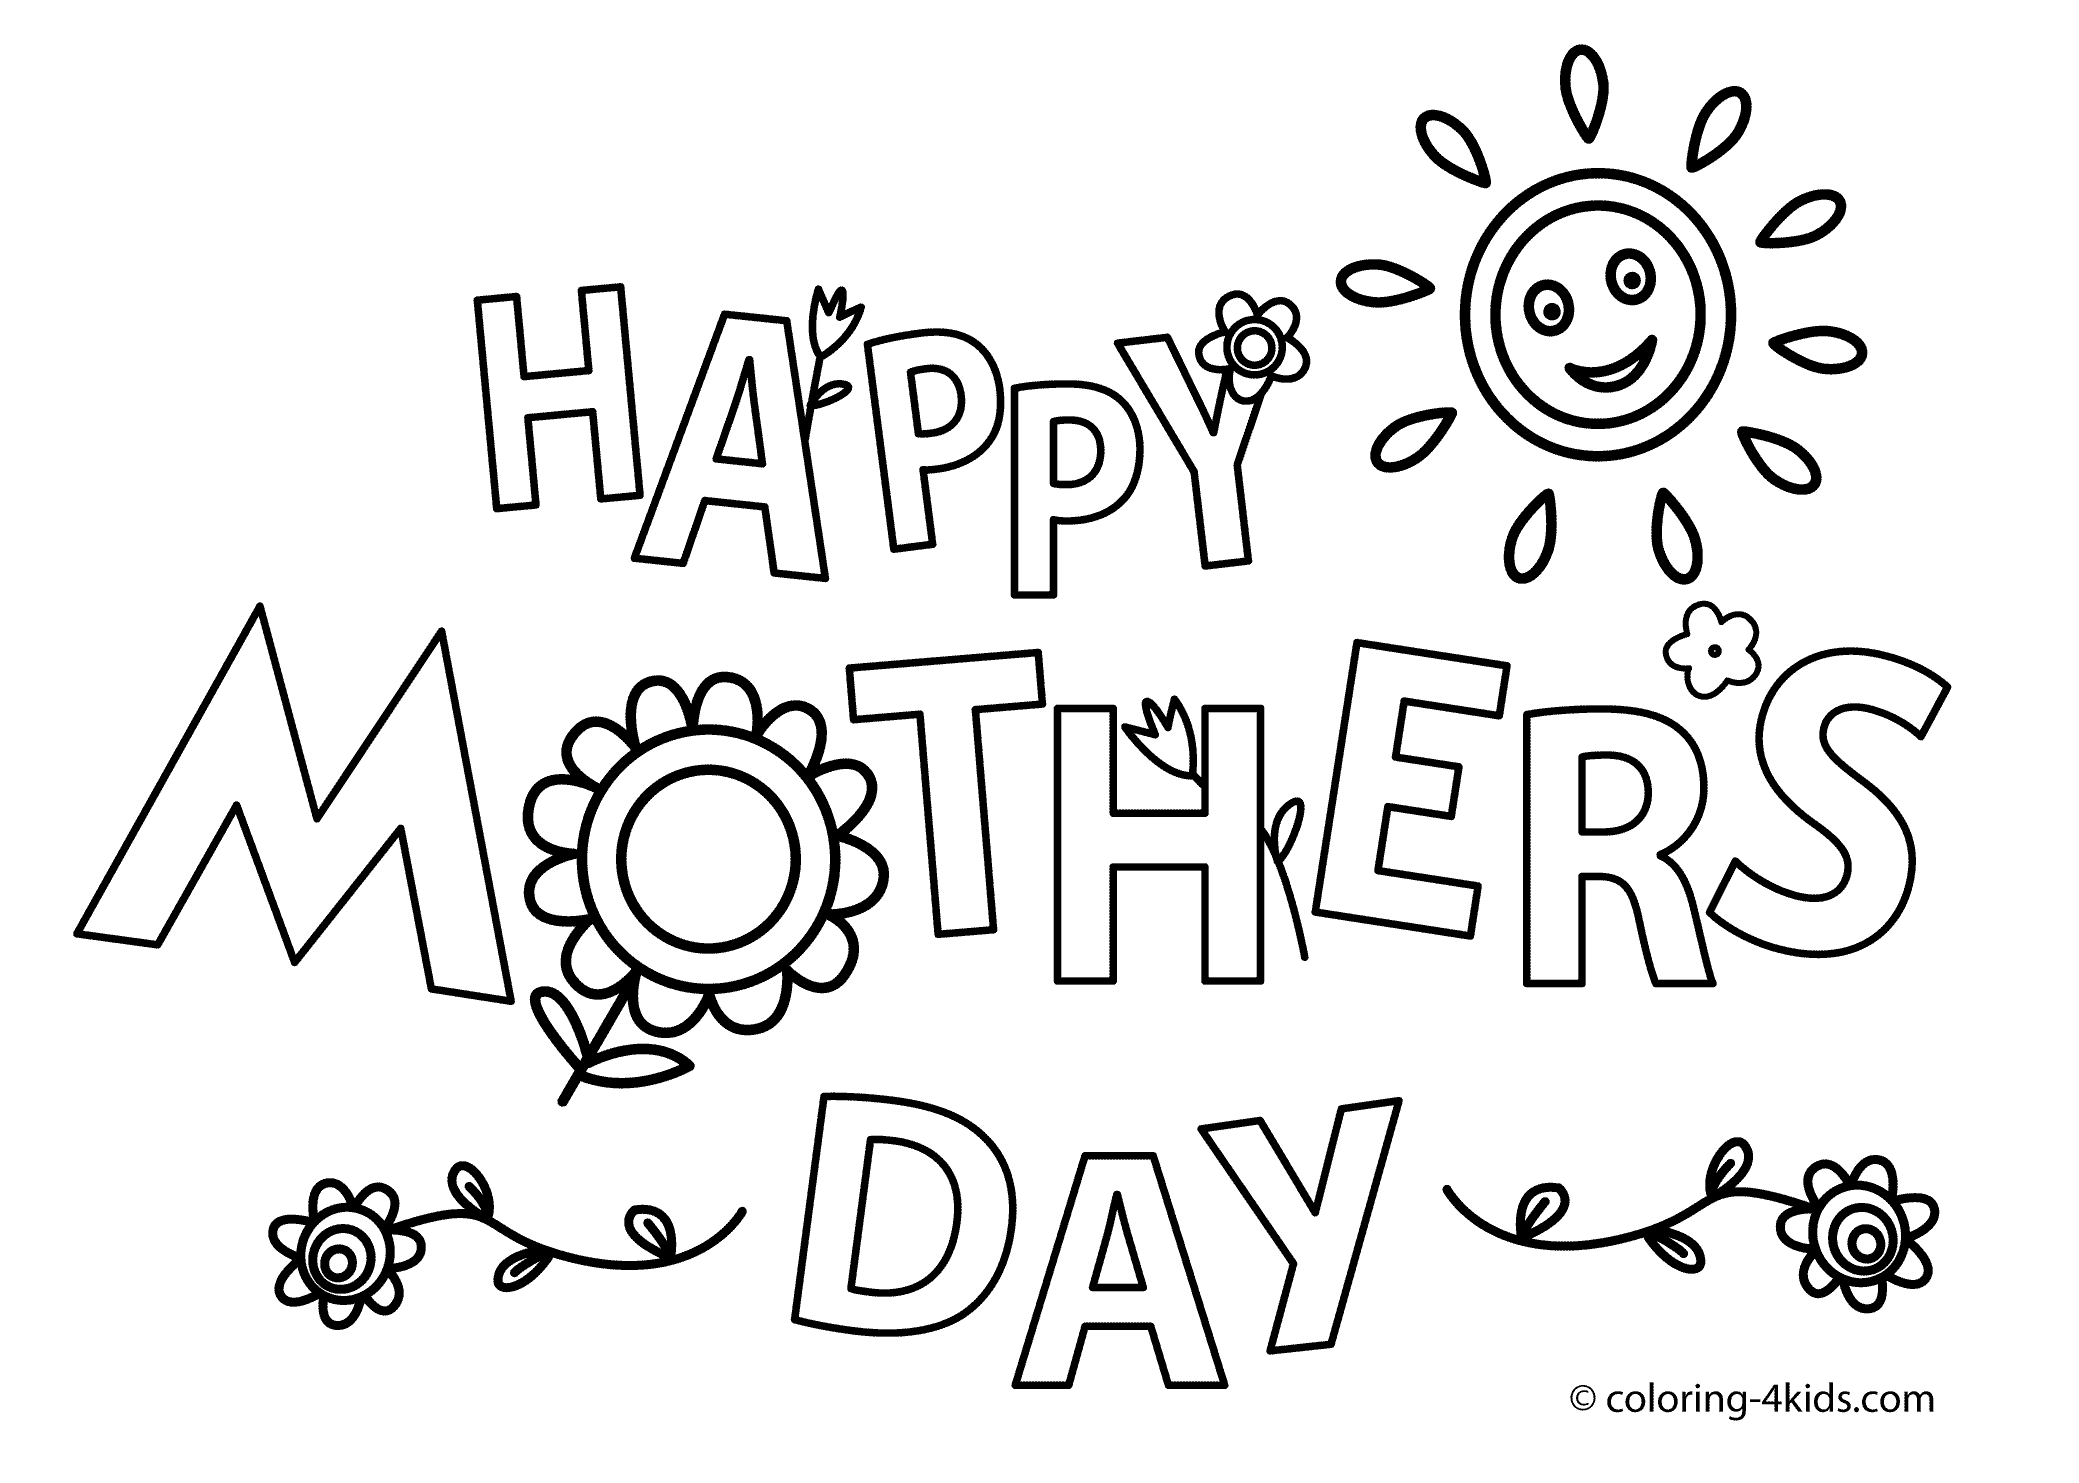 entrelosmedanos-mothers-day-coloring-pages-free-printable